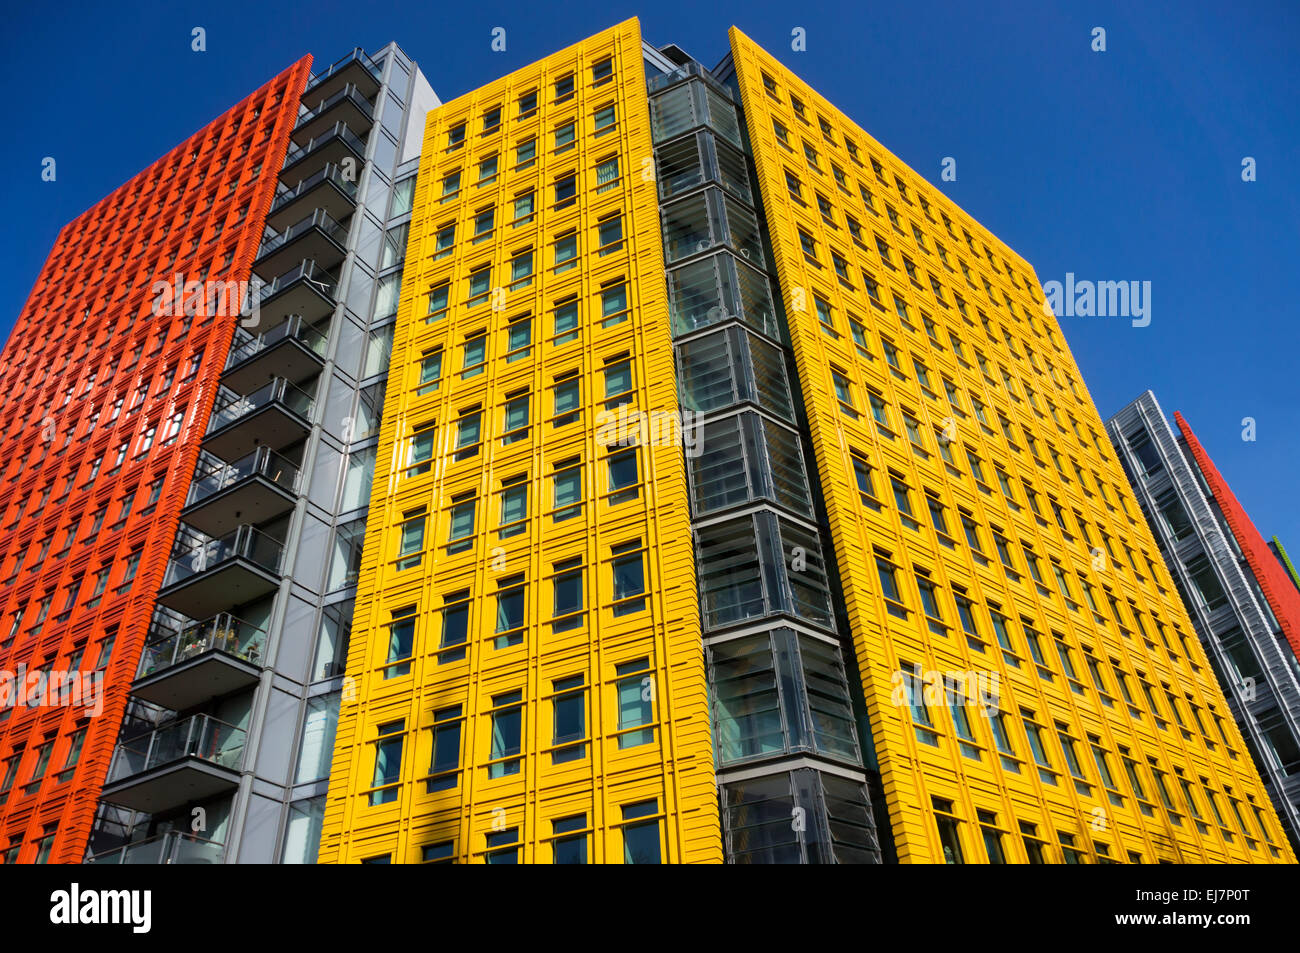 Colourful cladding on the Central St Giles mixed-use development in central London, designed by Renzo Piano. Stock Photo